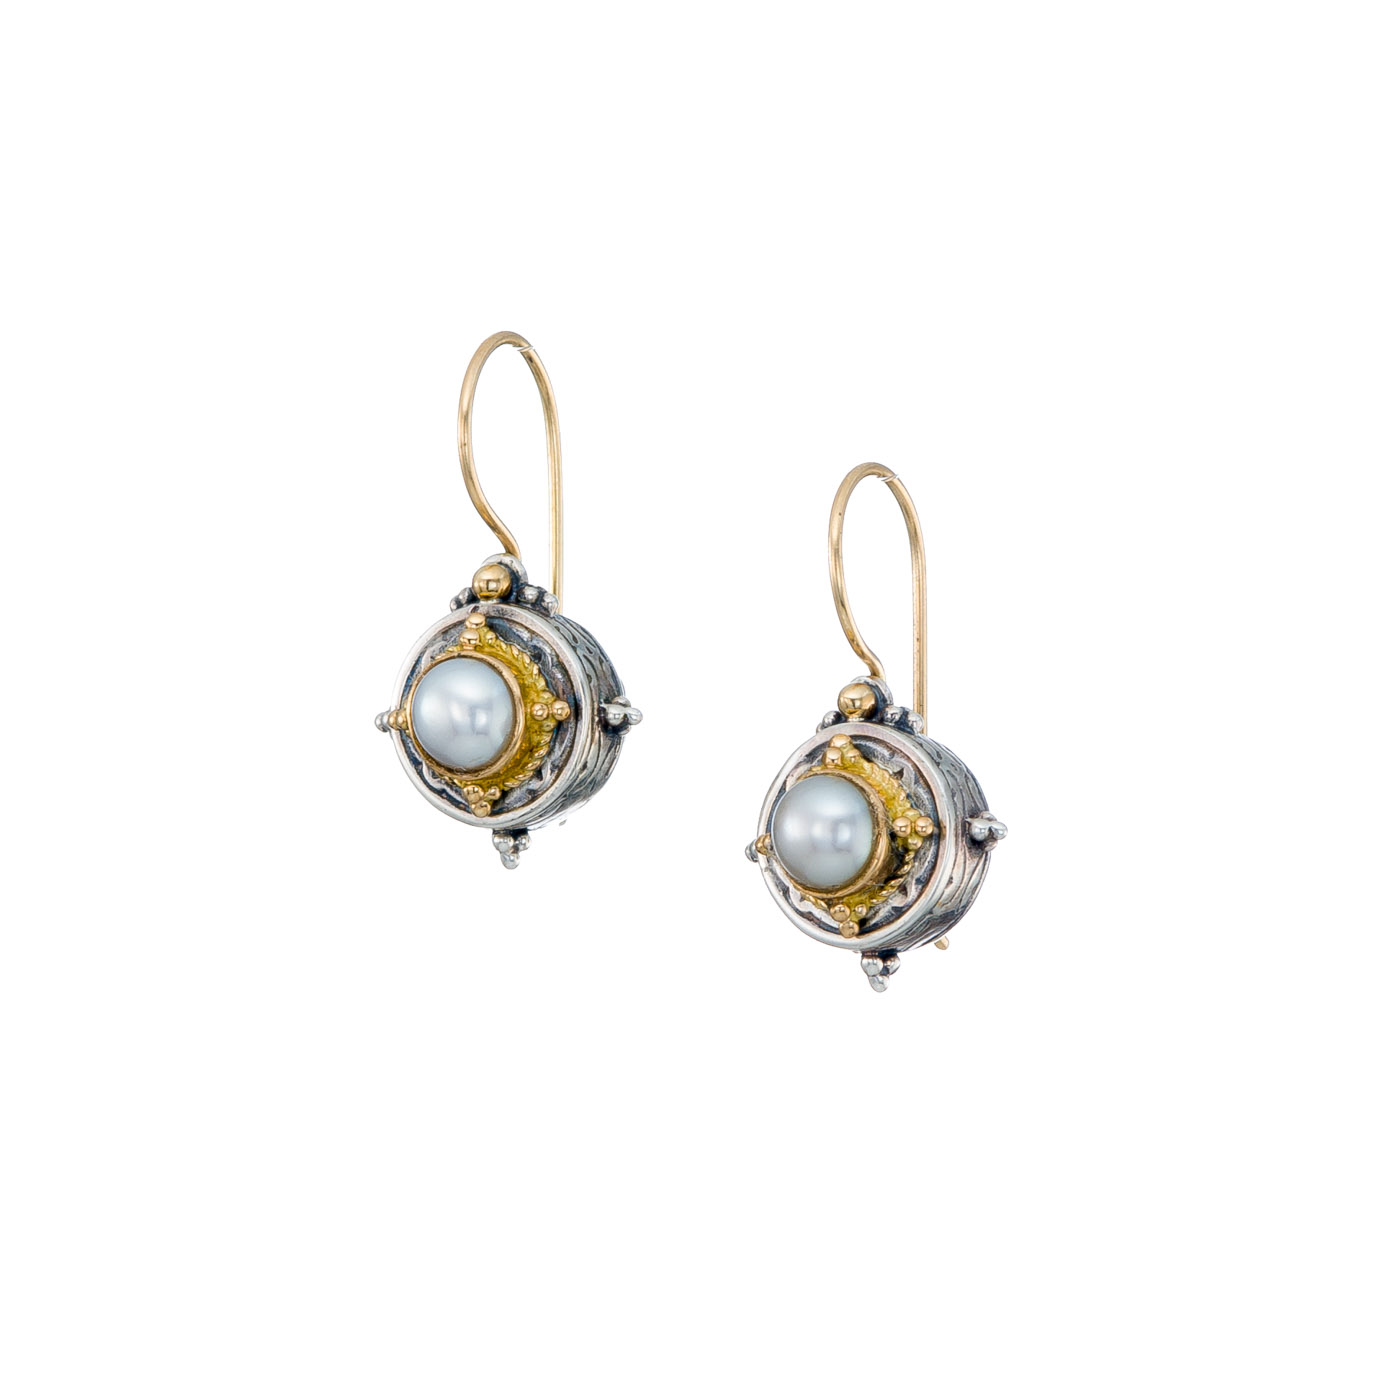 Cyclades round earrings in 18K Gold and Sterling silver